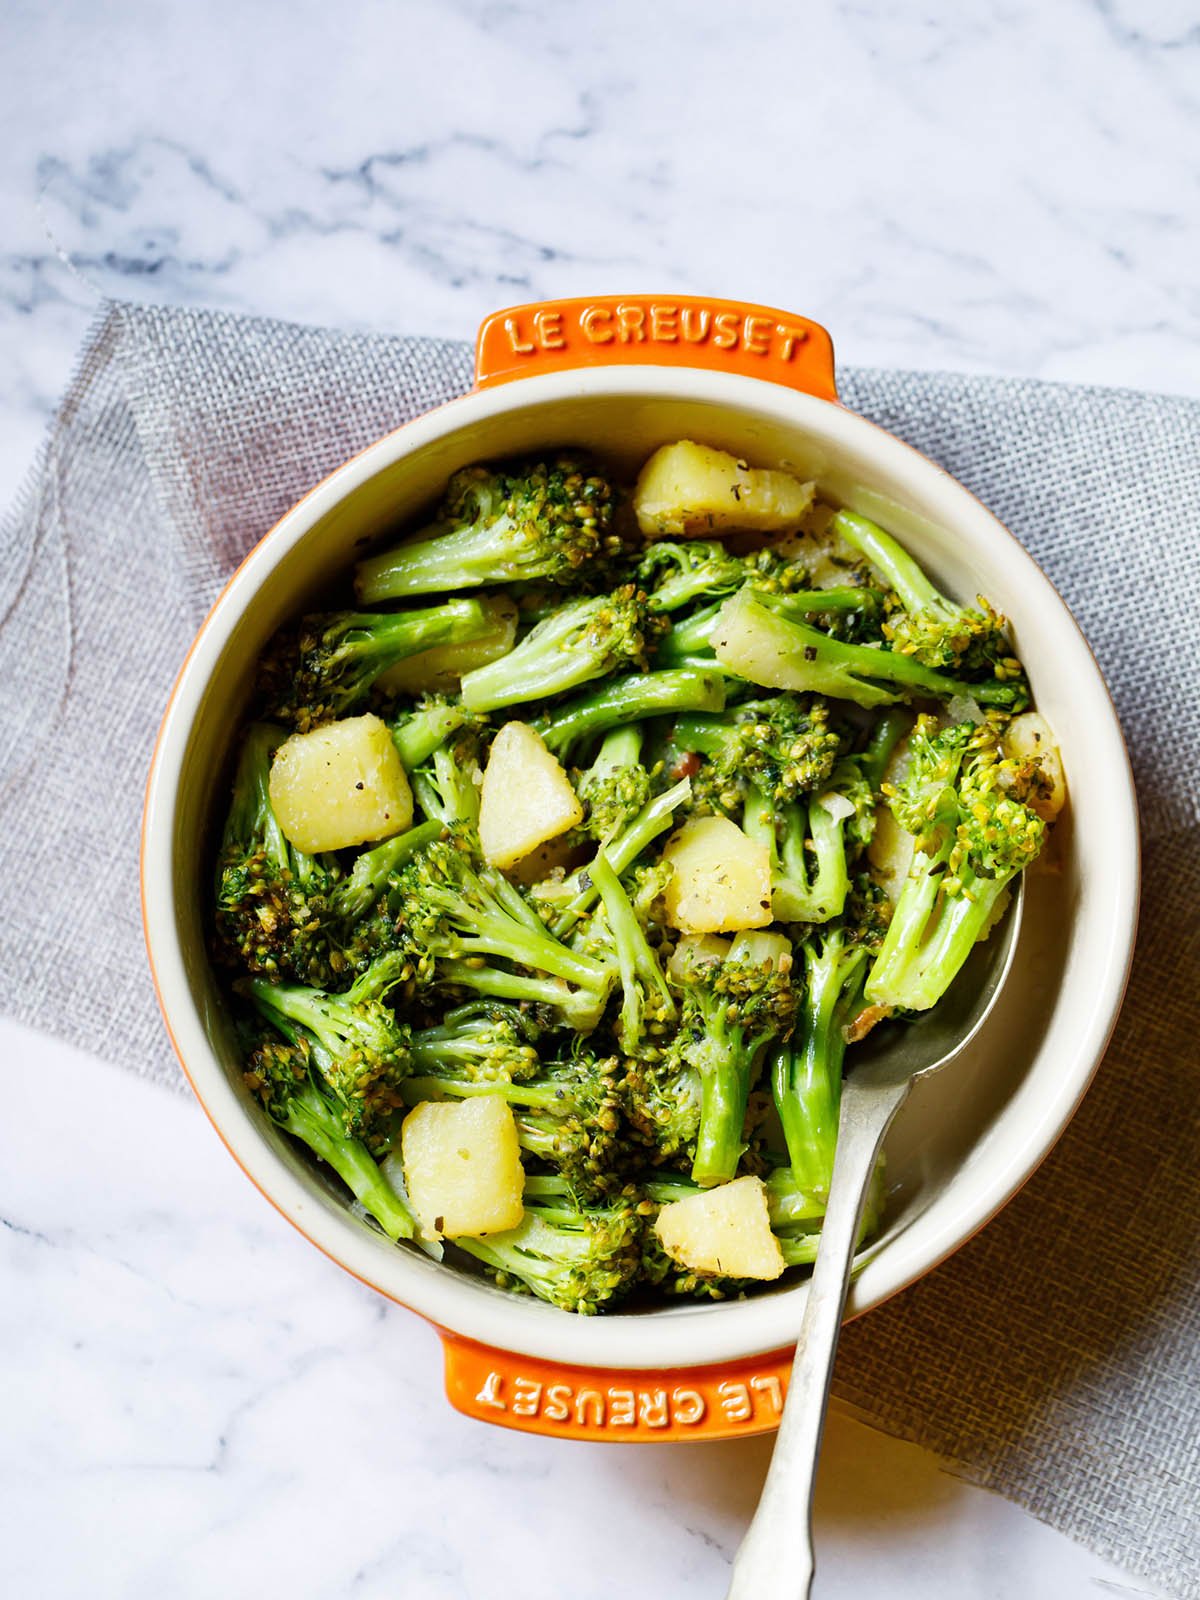 sauteed broccoli in a le creuset cream ceramic pan with orange handles with a spoon inside placed on a folded light gray jute fabric